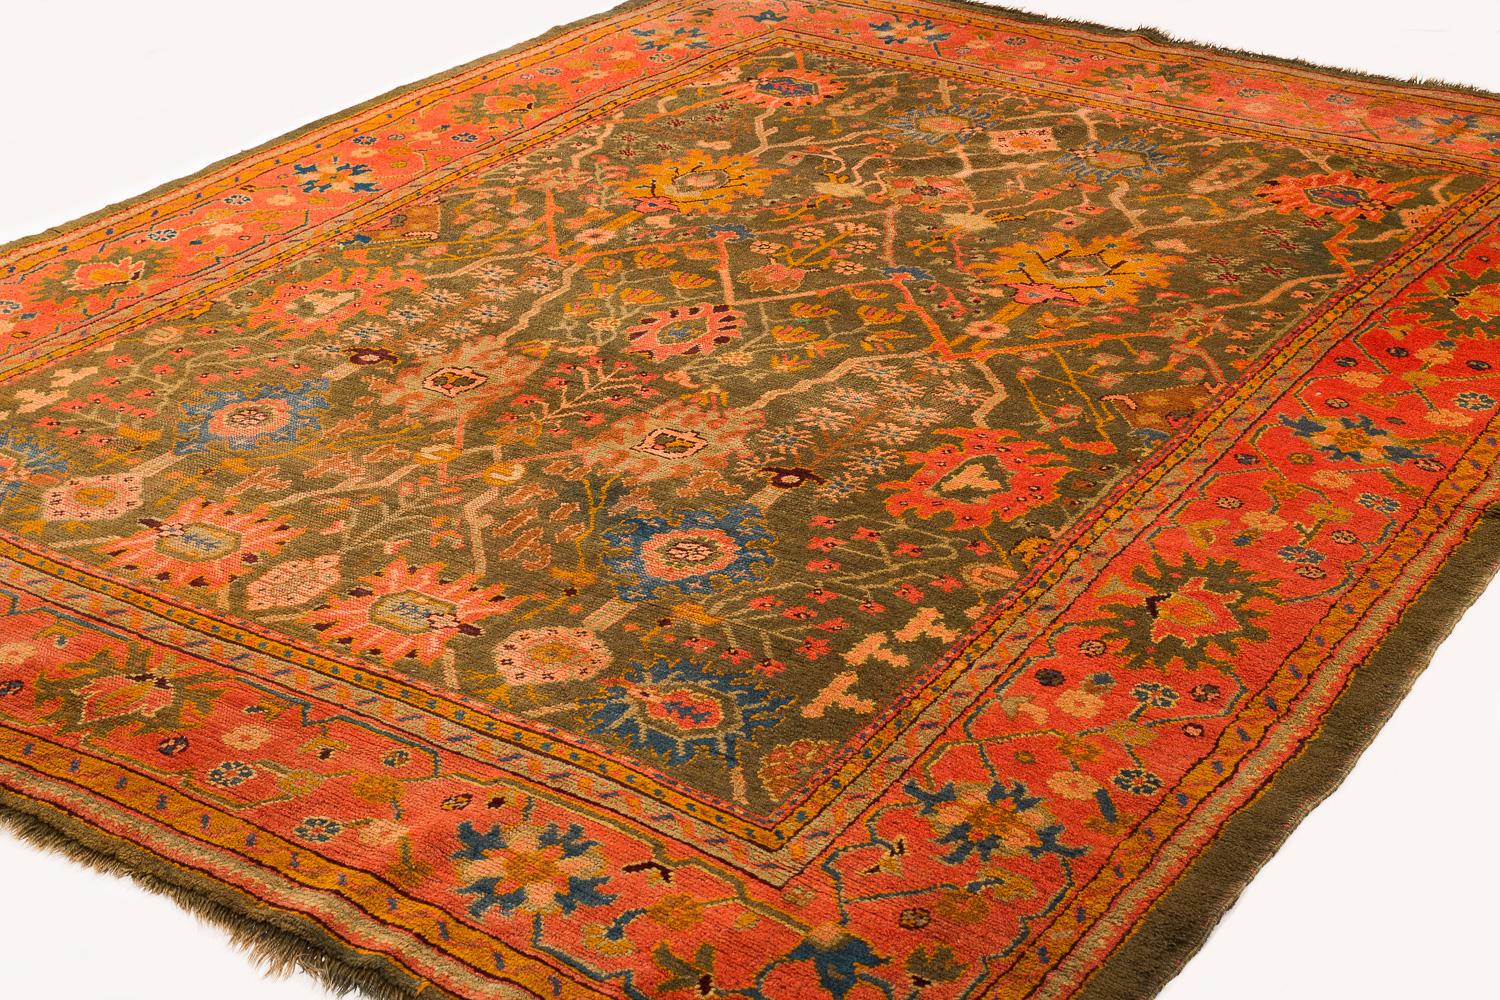 This antique Ouskak is an exceptional piece. This type of Oushak is very desirable based on the design and colors. The colors are really incredible jewel tones, the colors in this rug are rare for this type of Oushak. For its age, this rug is in